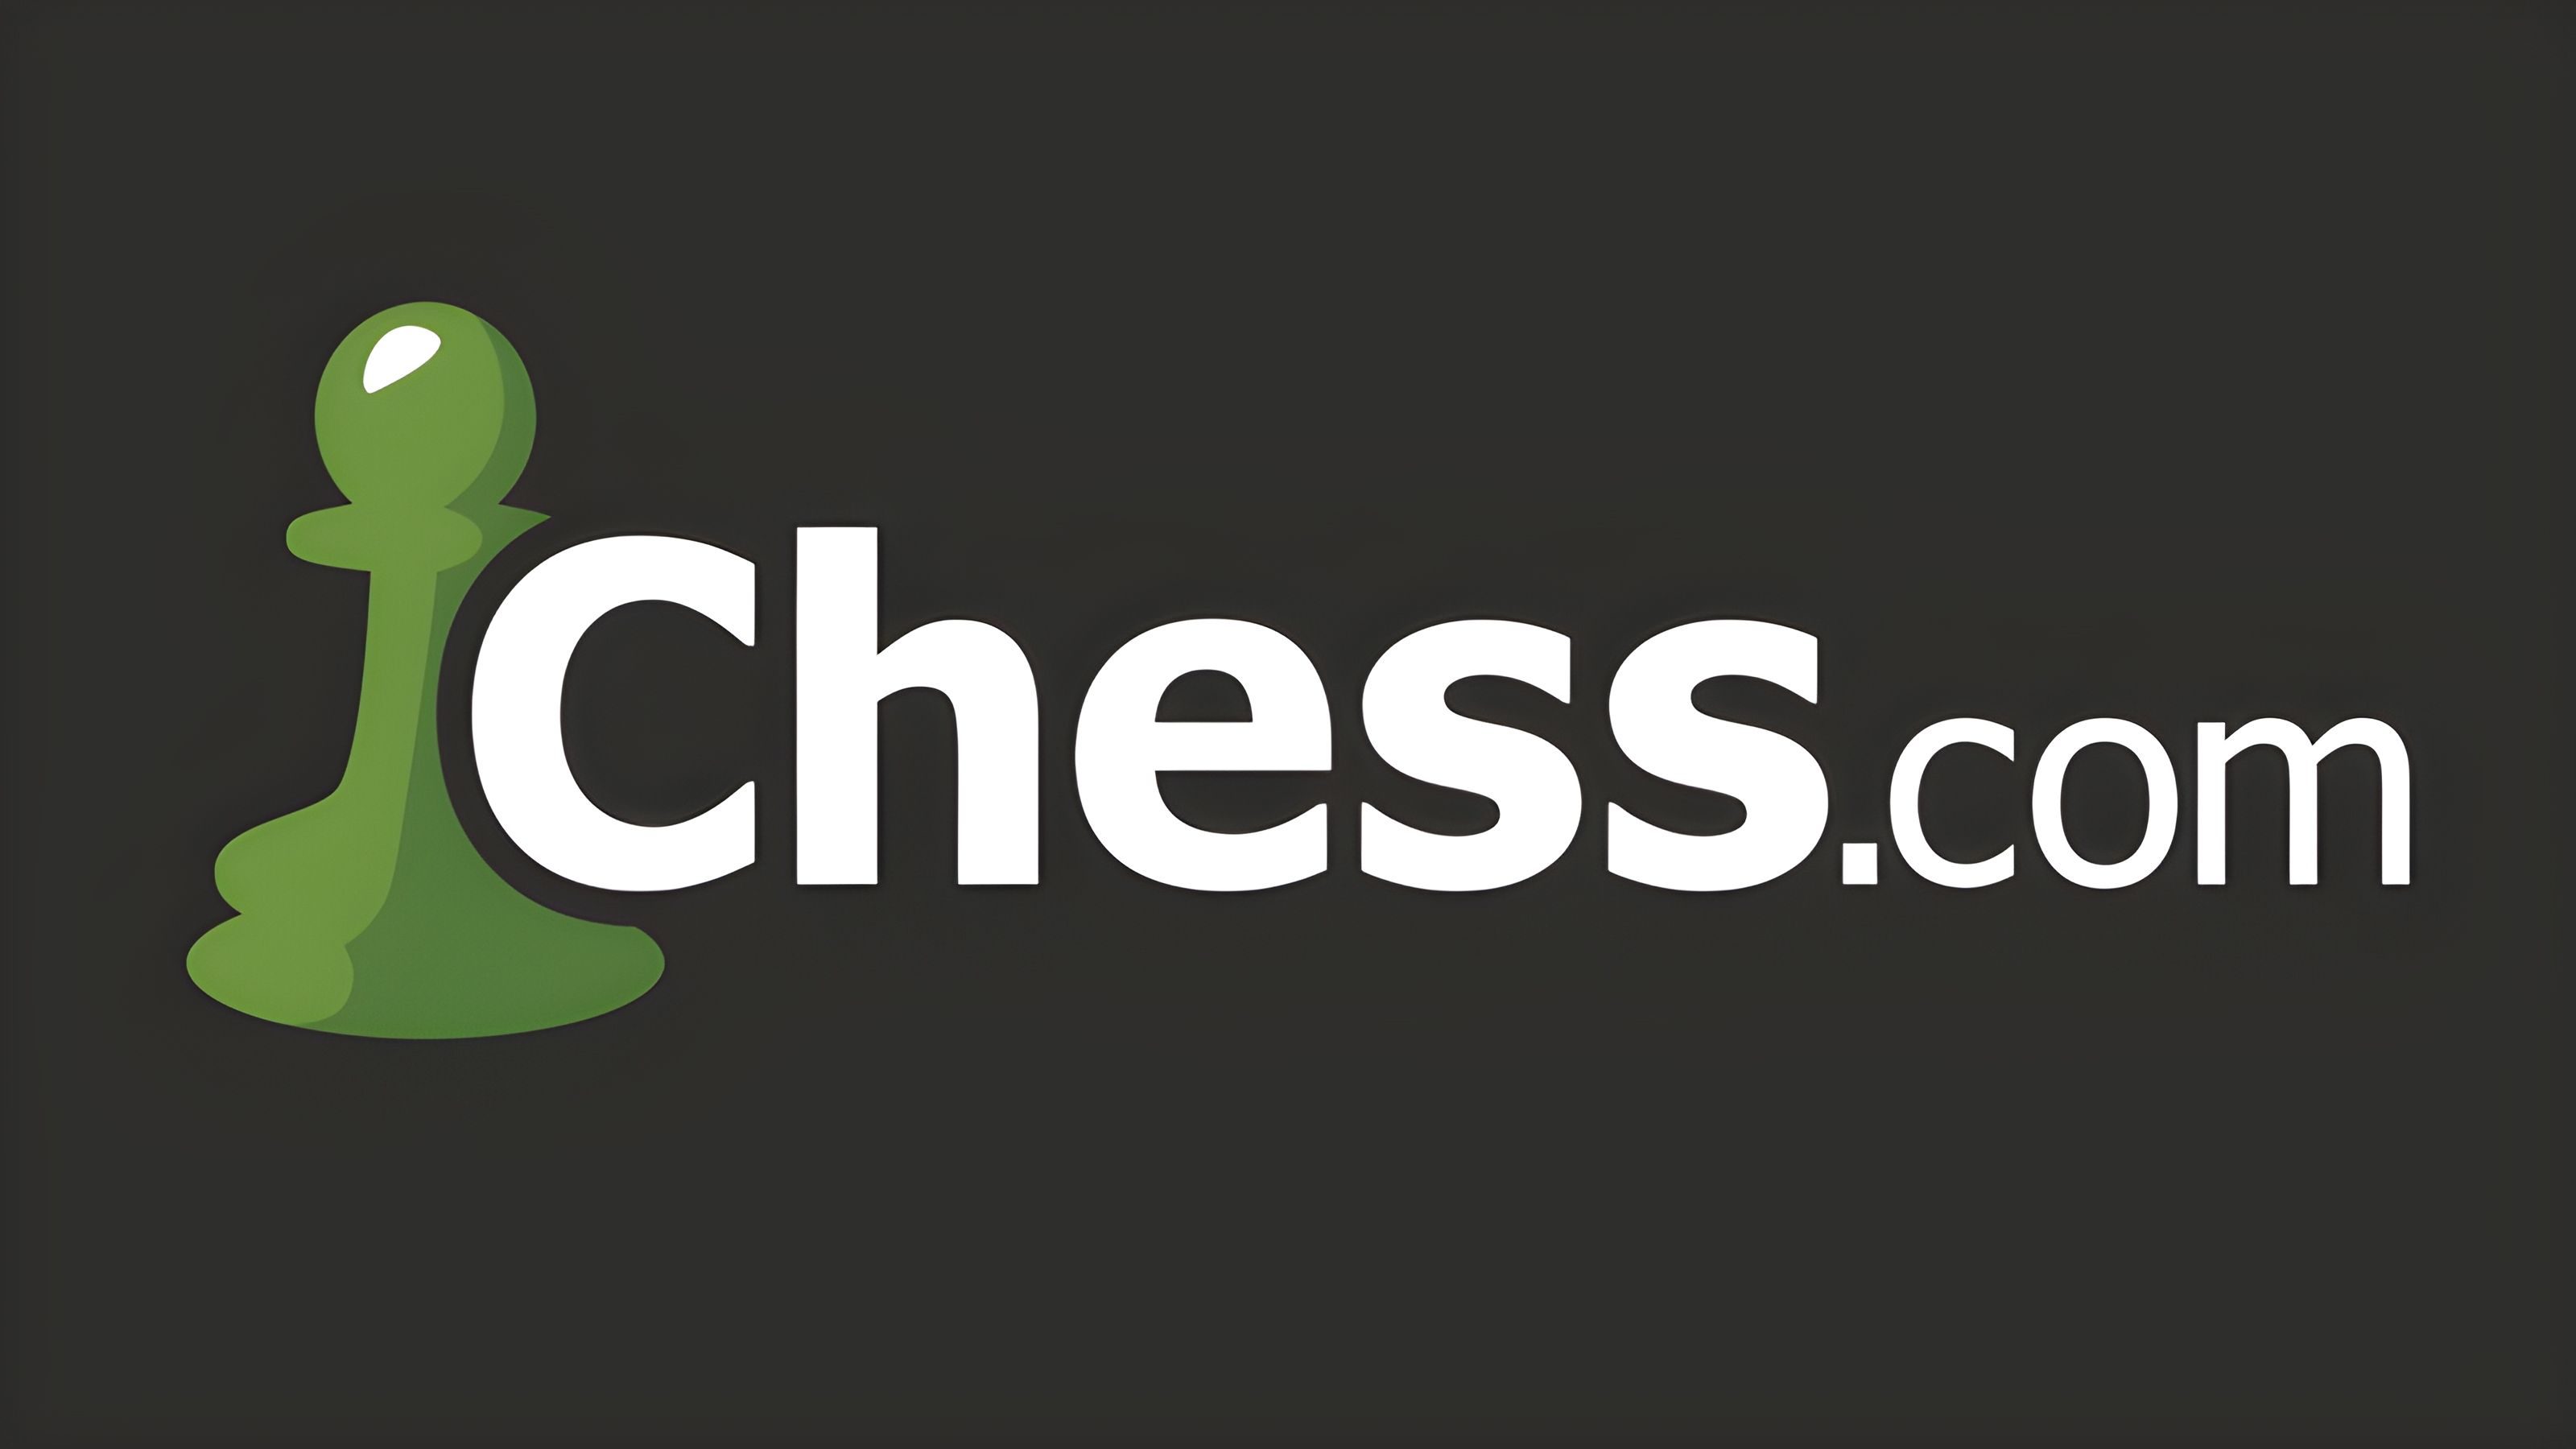 Where to Play Chess Online? Your Top 5 Chess Platforms - Remote